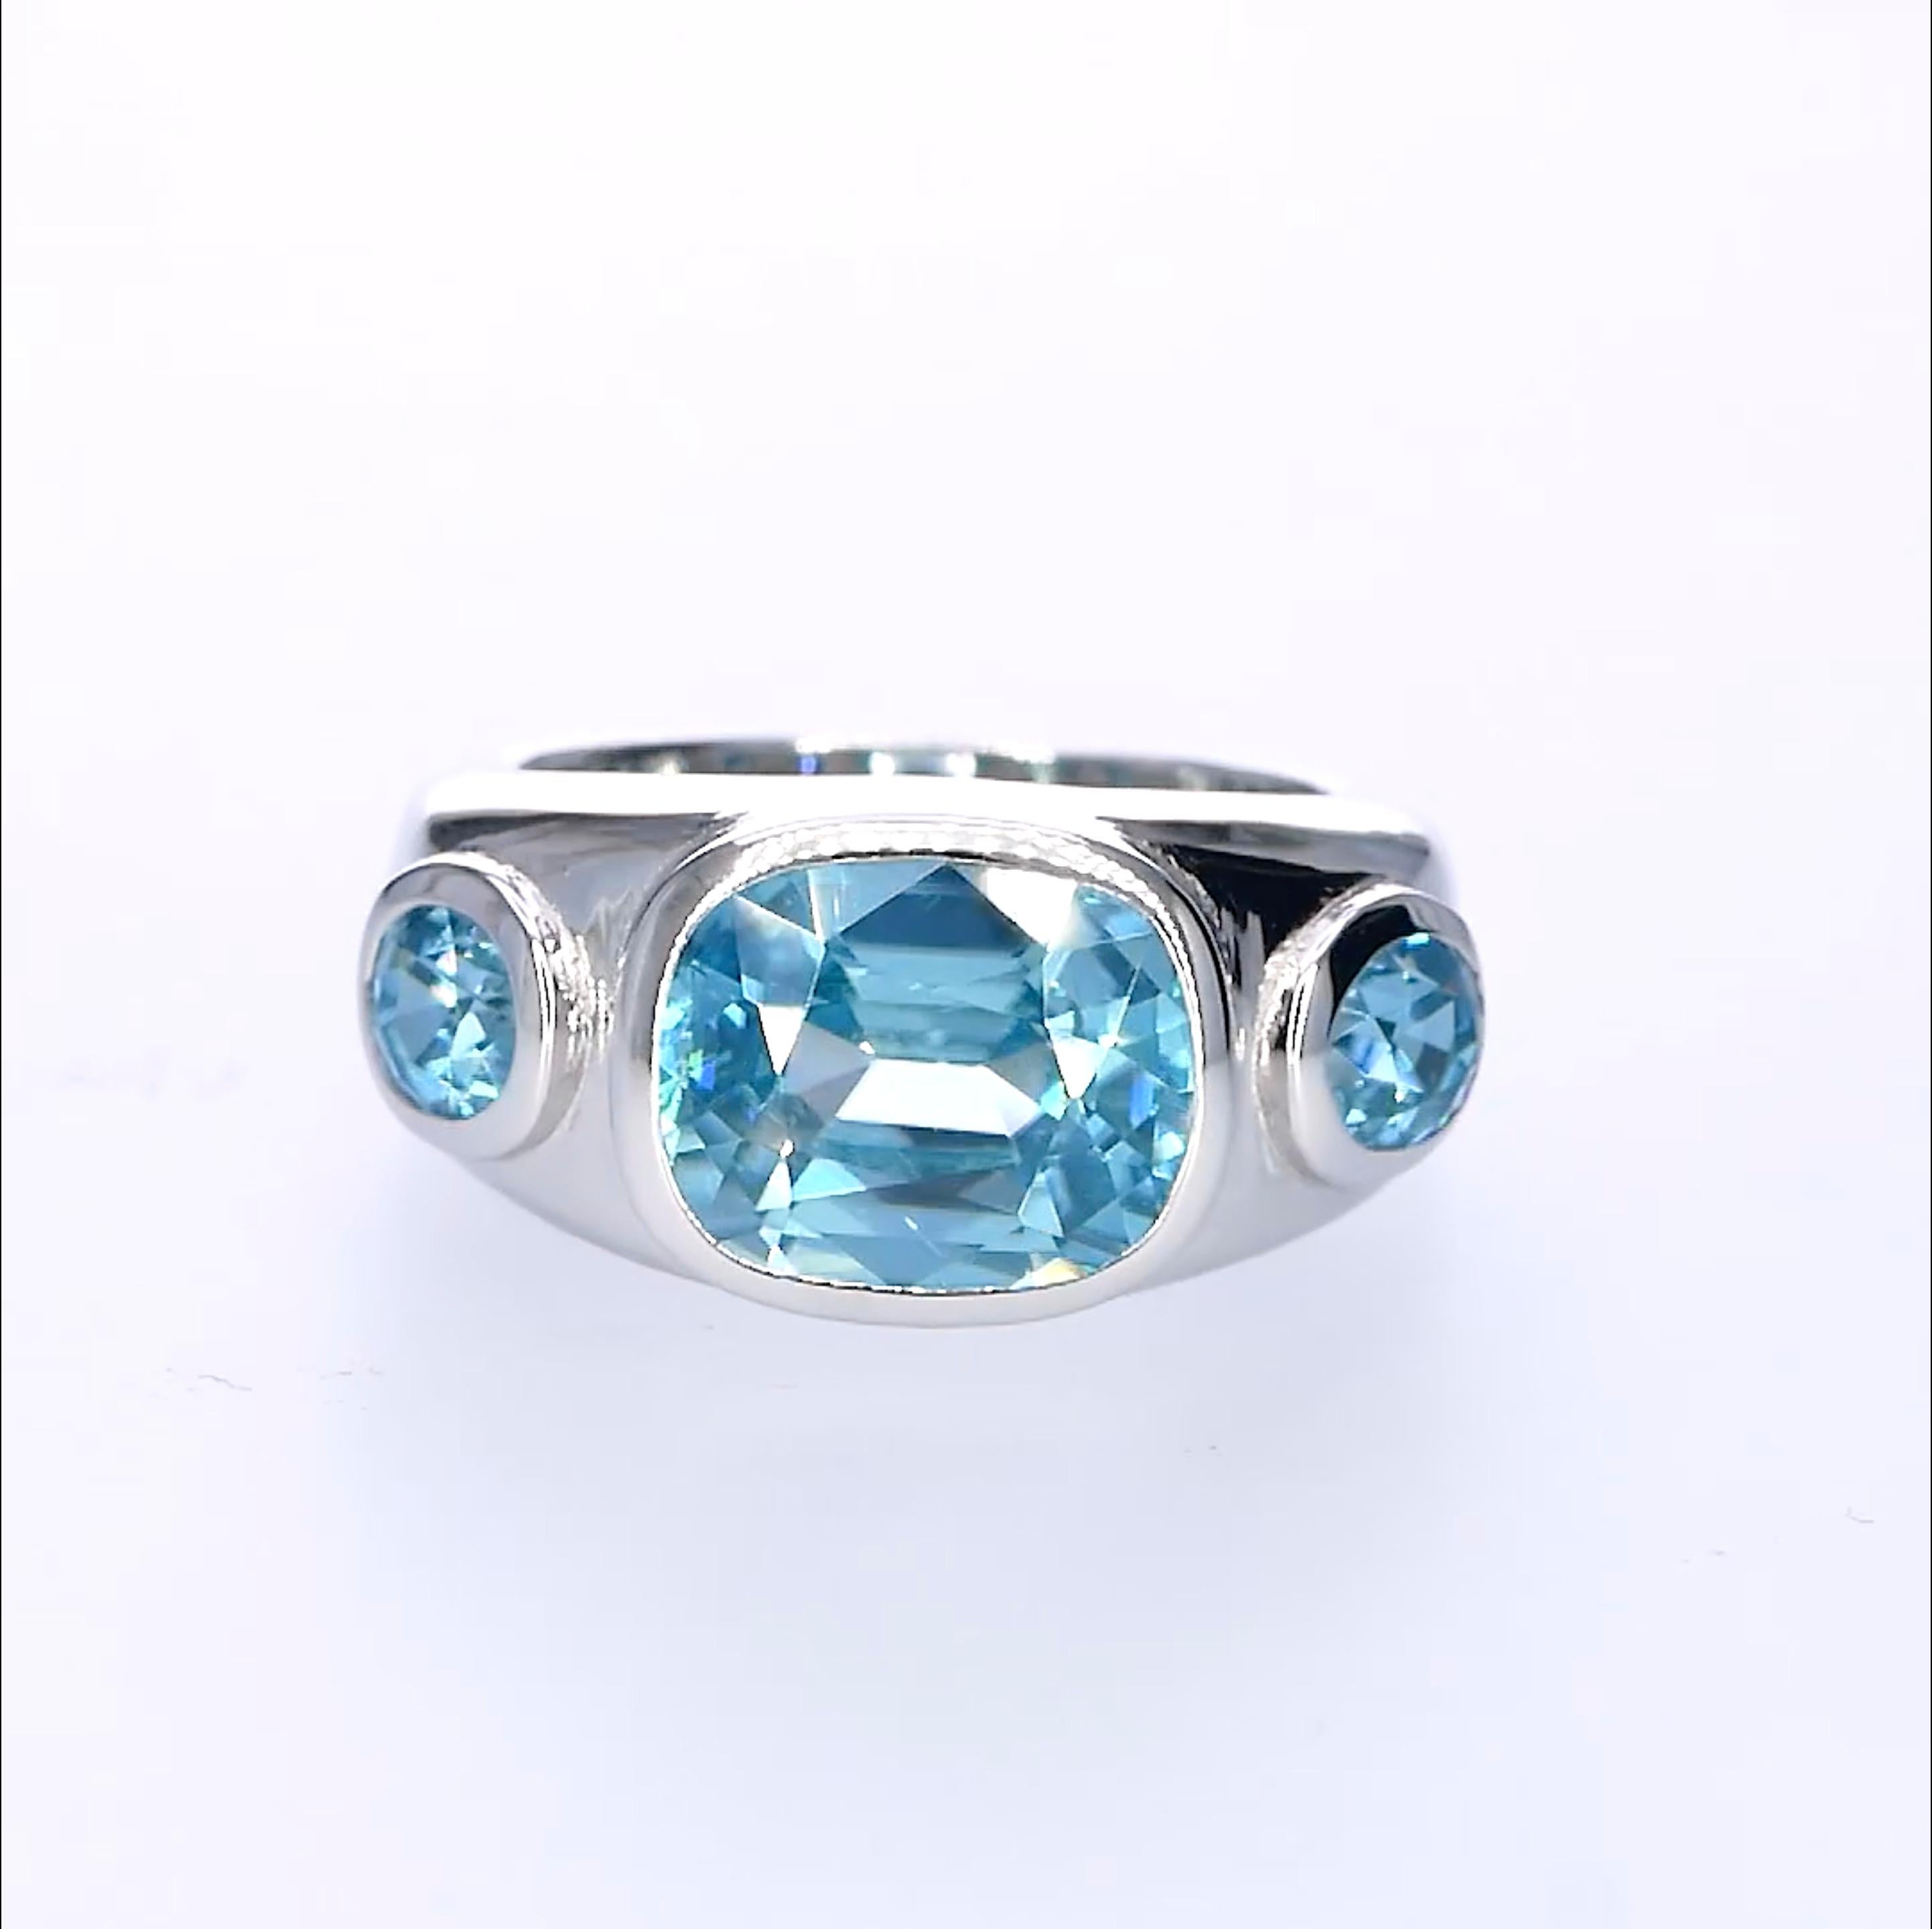 Mixed Cut Orloff of Denmark, 7.42 ct Natural Zircon Cocktail Ring in 925 Sterling Silver For Sale